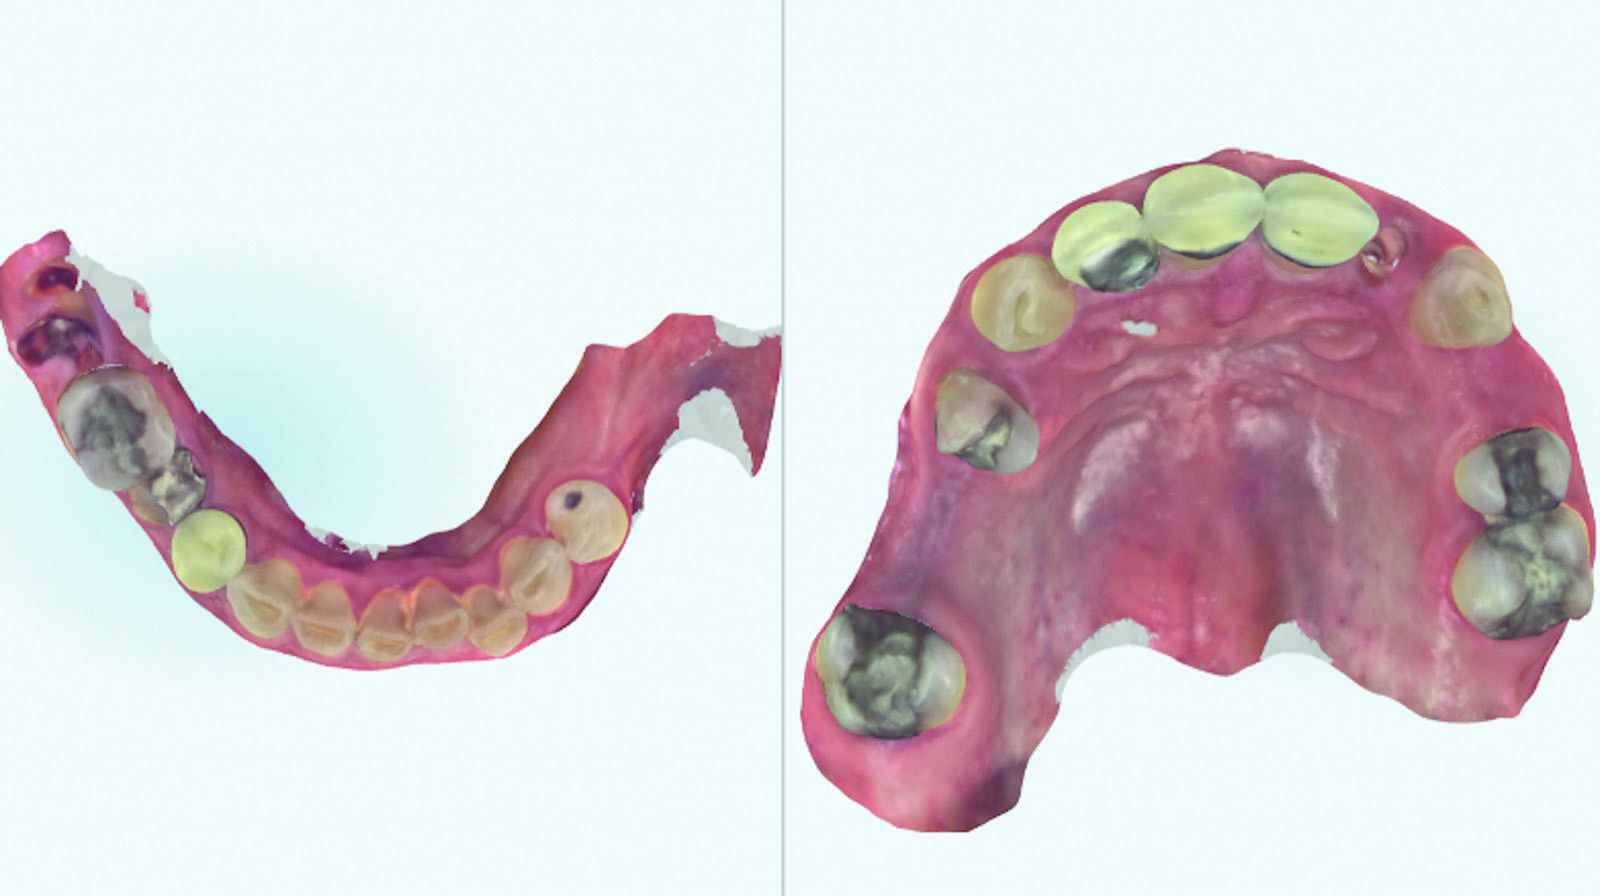 Accurate 3D intra-oral scans